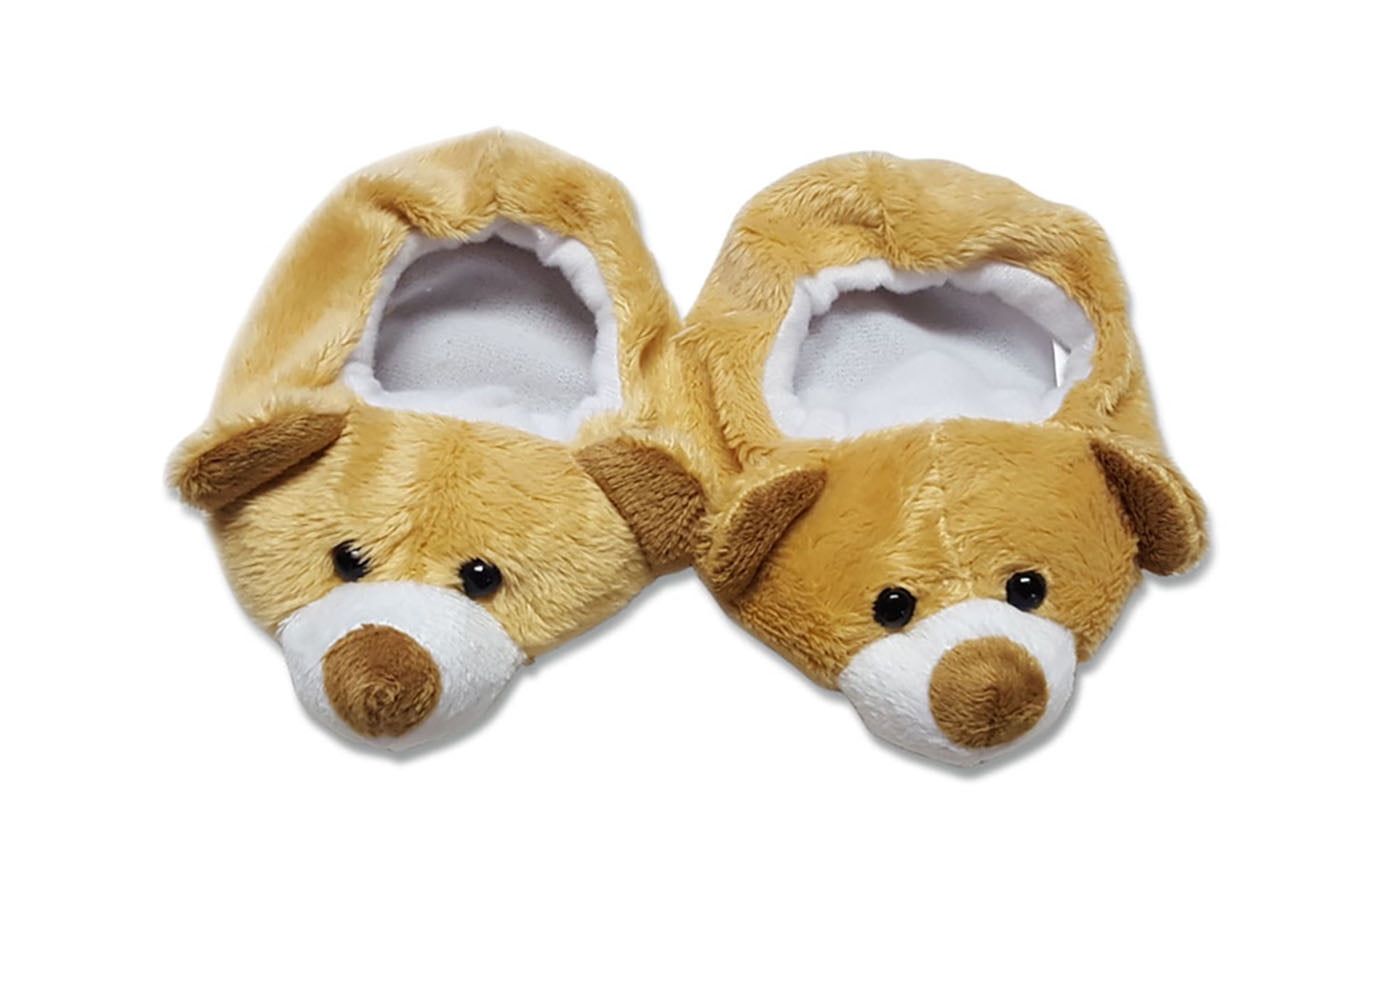 Blue Bear Slippers Fits Most 14" 18" Build-a-bear and Make Your Own Stuffed An 